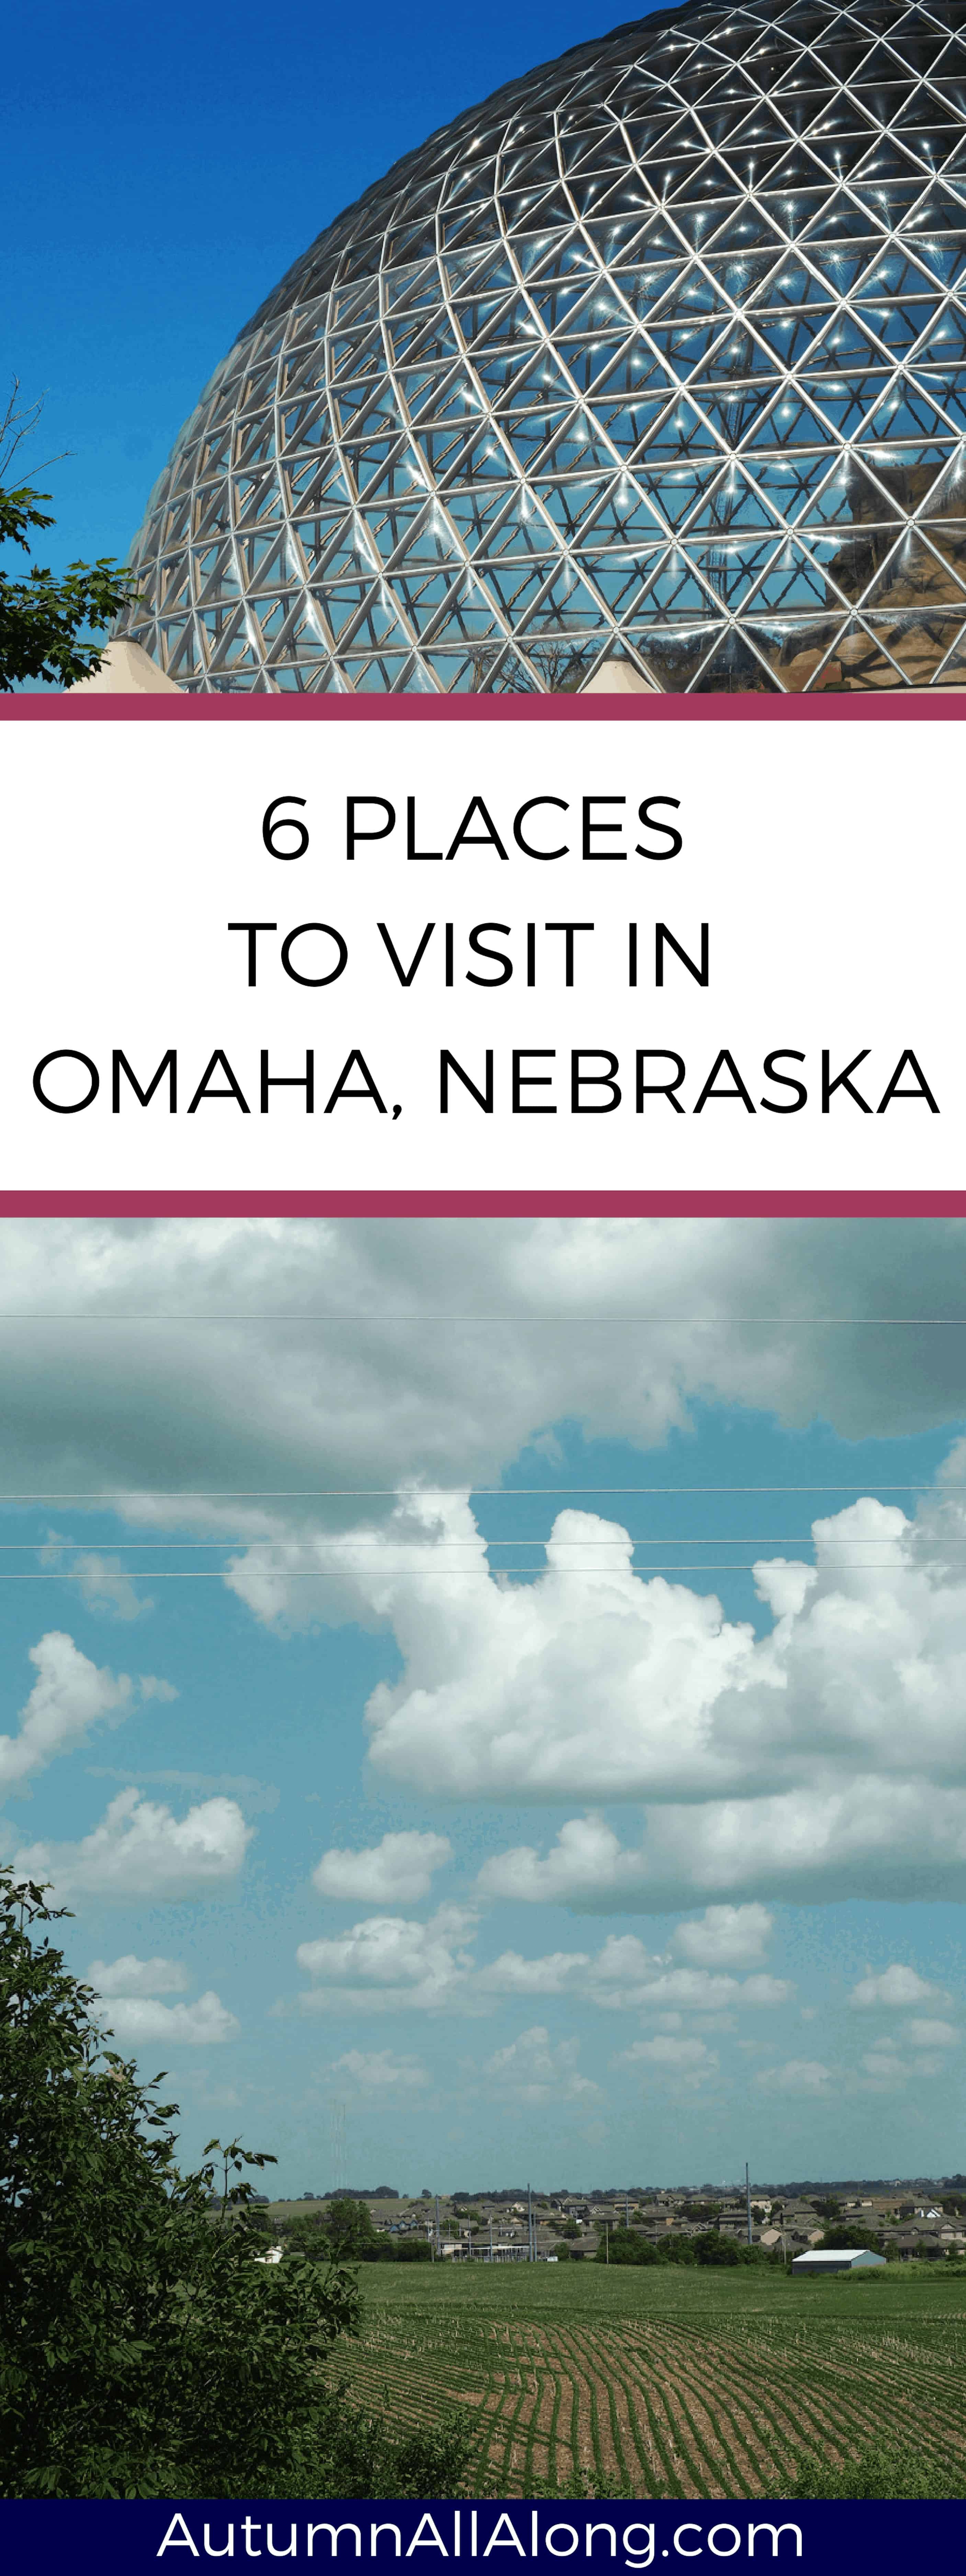 6 places to visit in Omaha, Nebraska — Autumn all along